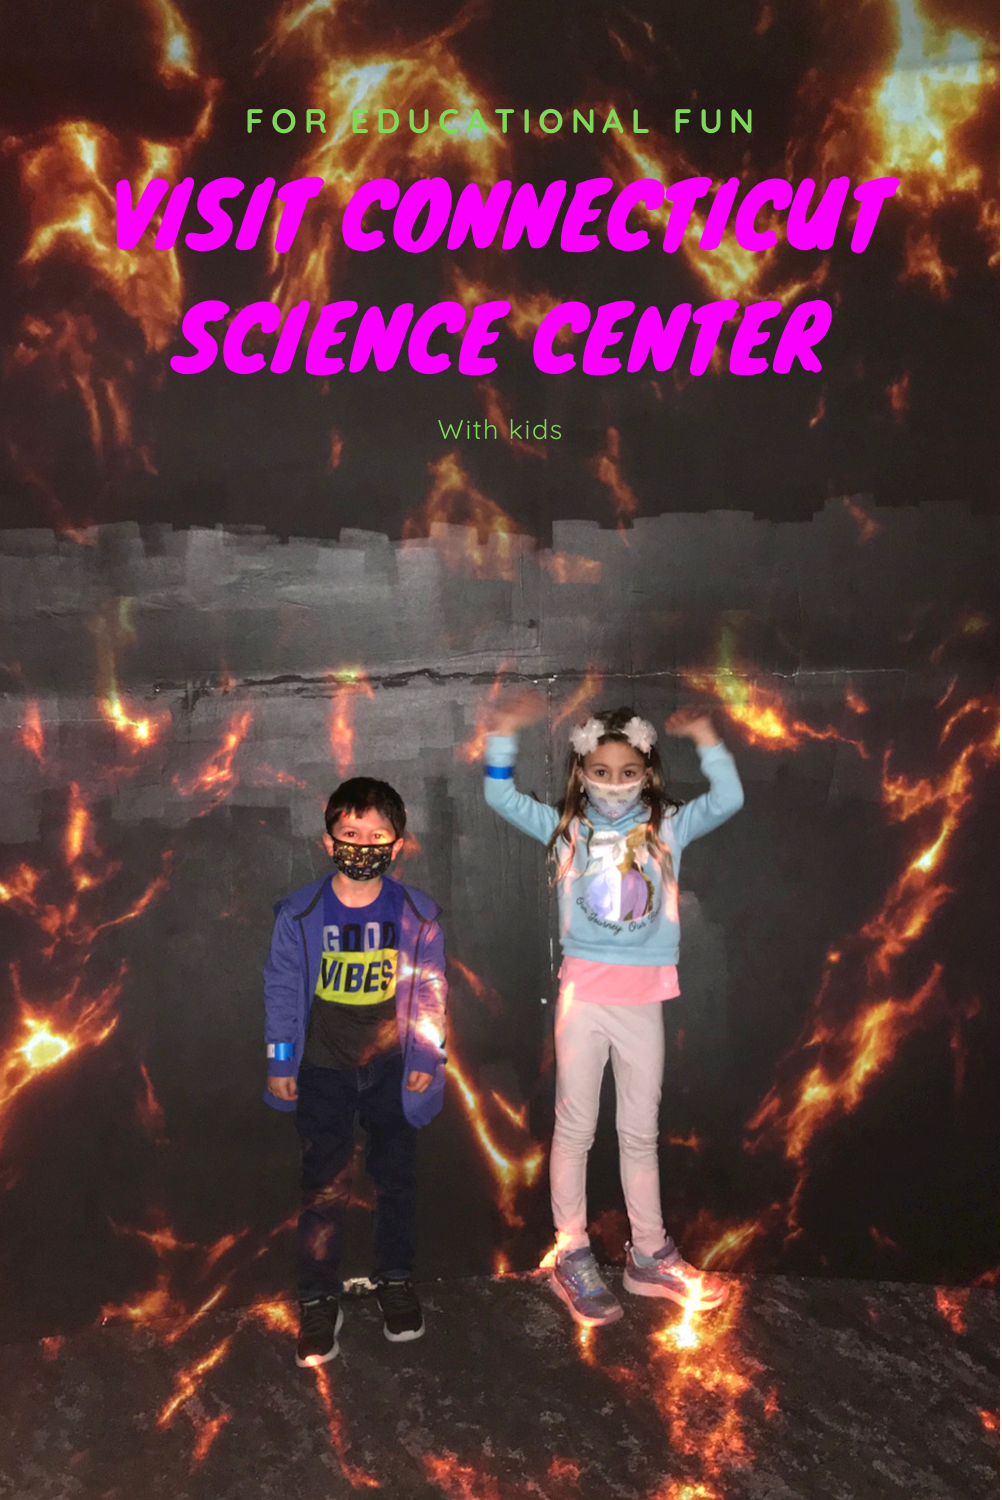 Connecticut Science Center with kids in Hartford, CT